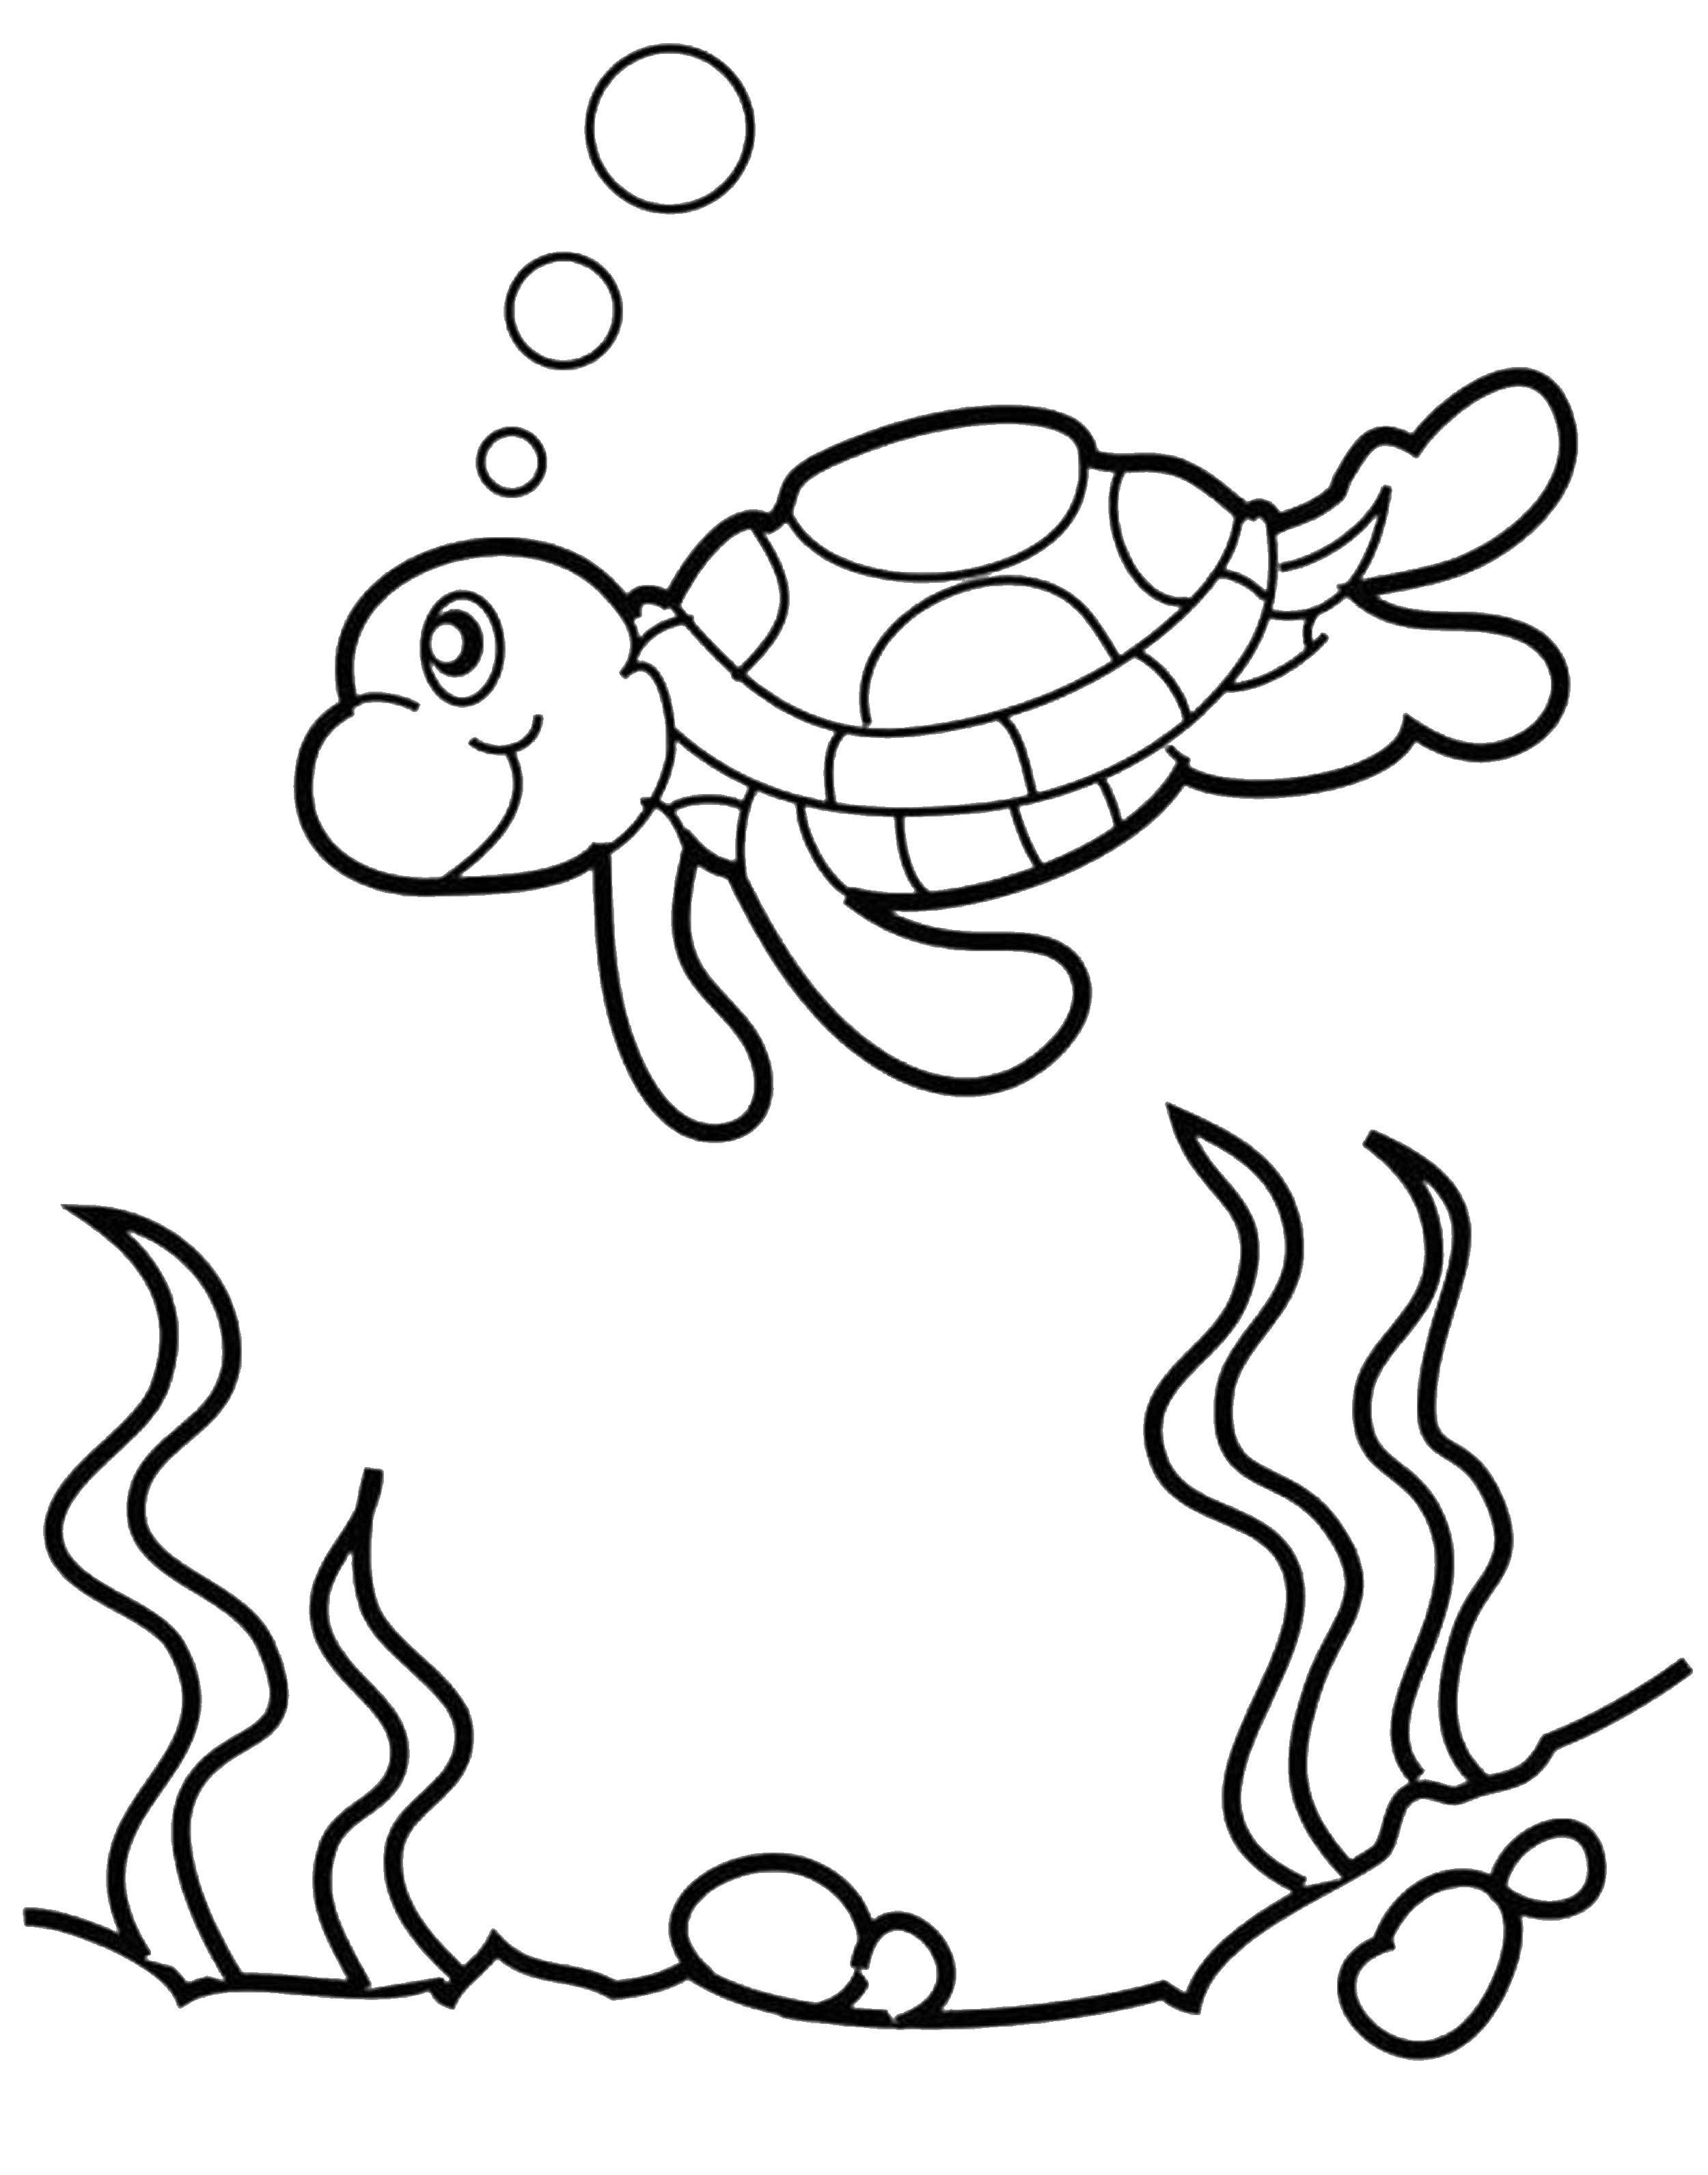 Coloring The turtle in the water. Category Animals. Tags:  animals, turtle, sea, water.